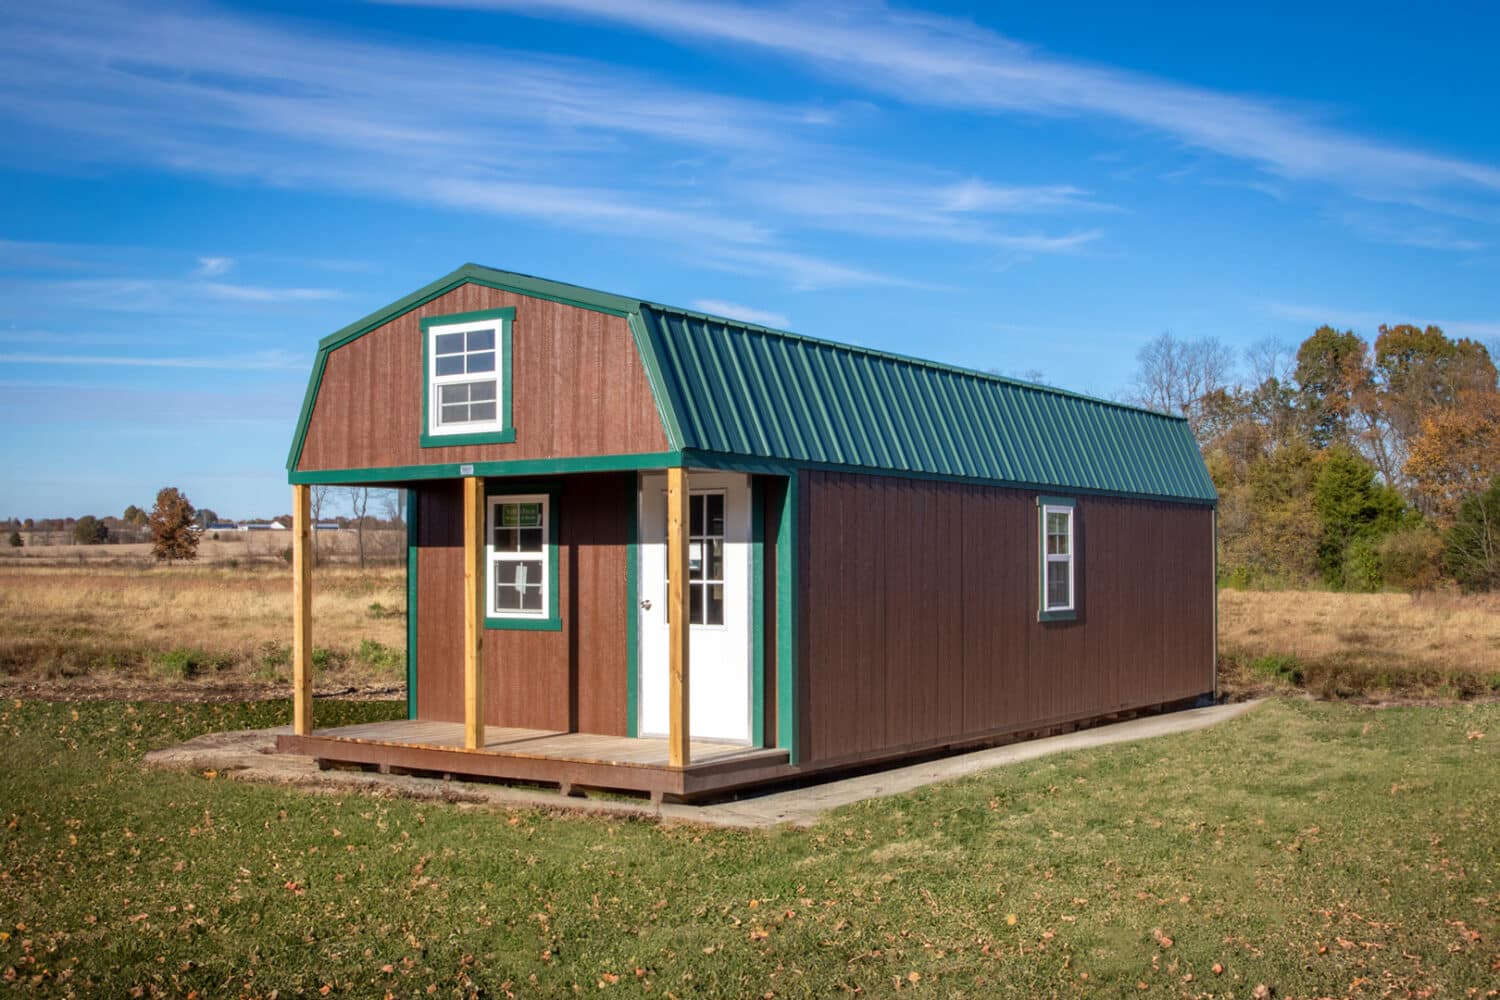 prebuilt cabins for storage in osage beach mo